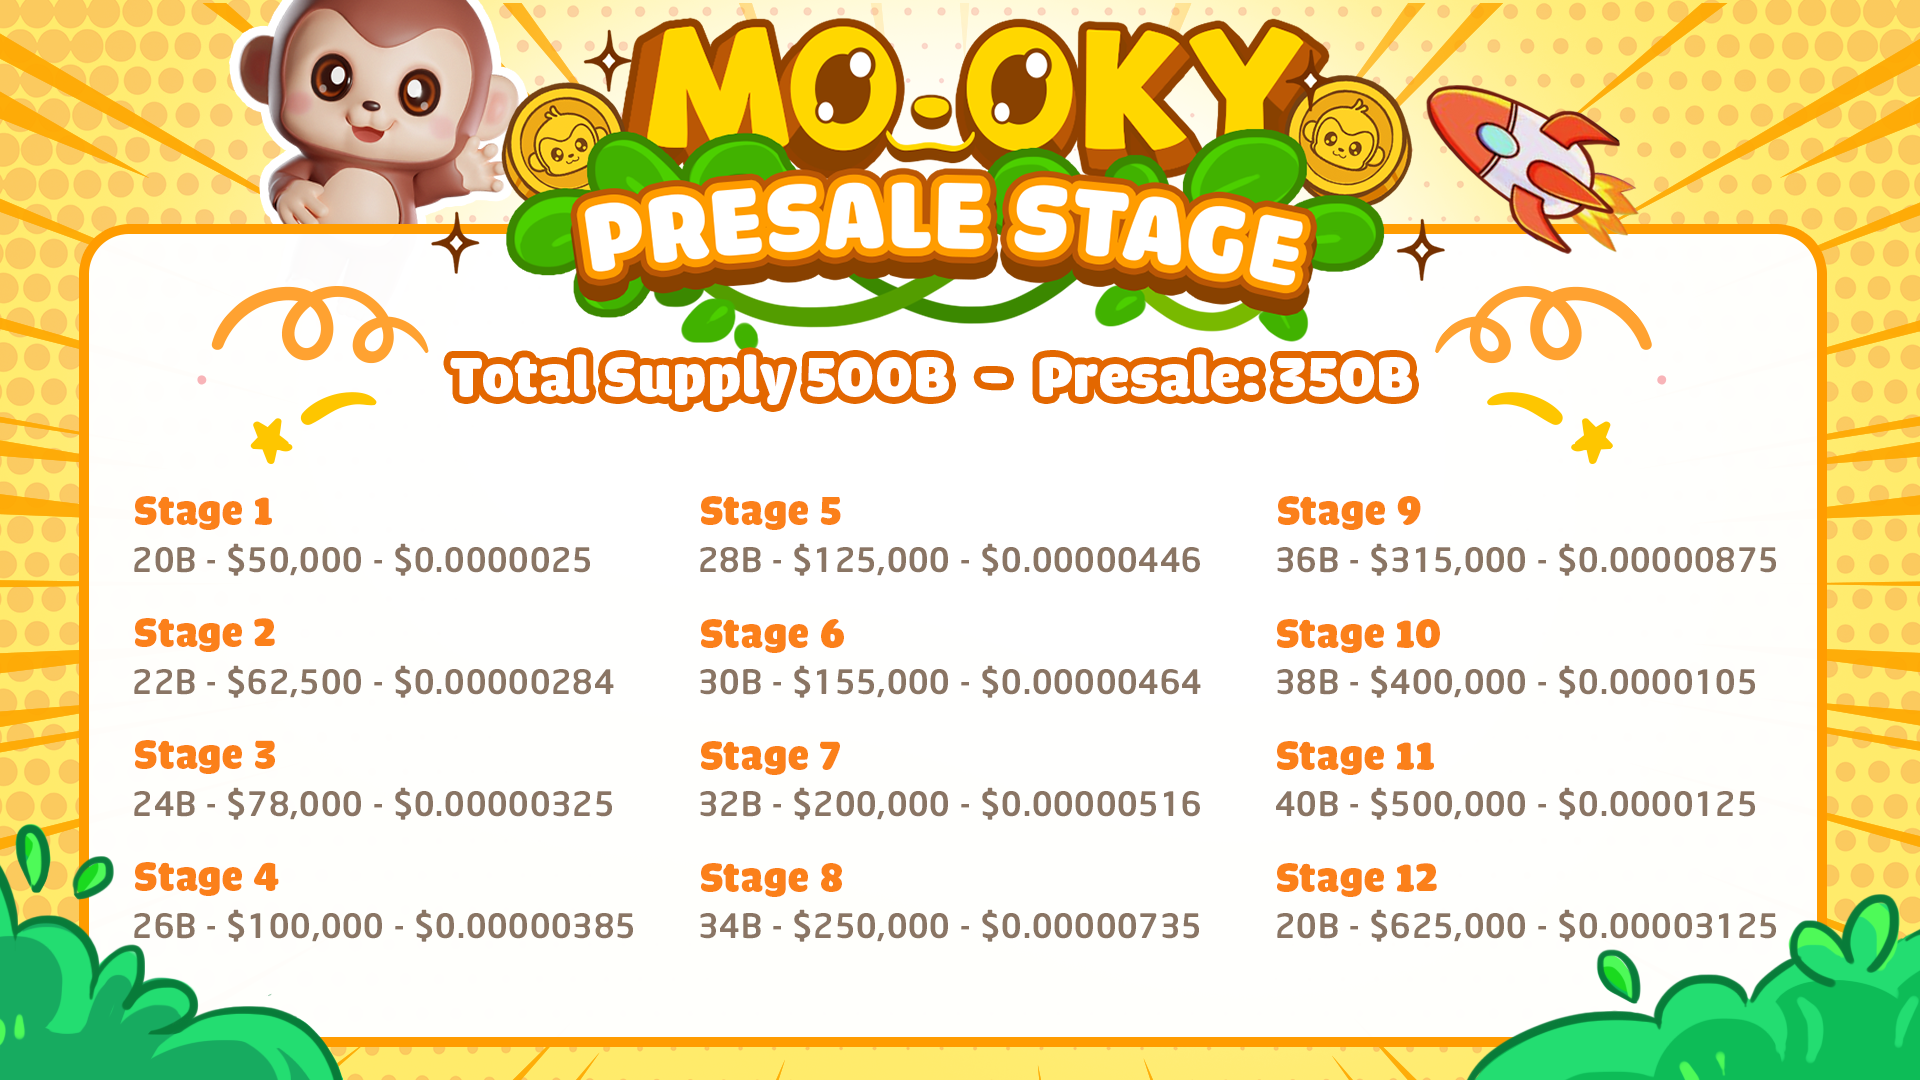 Mooky presale stages